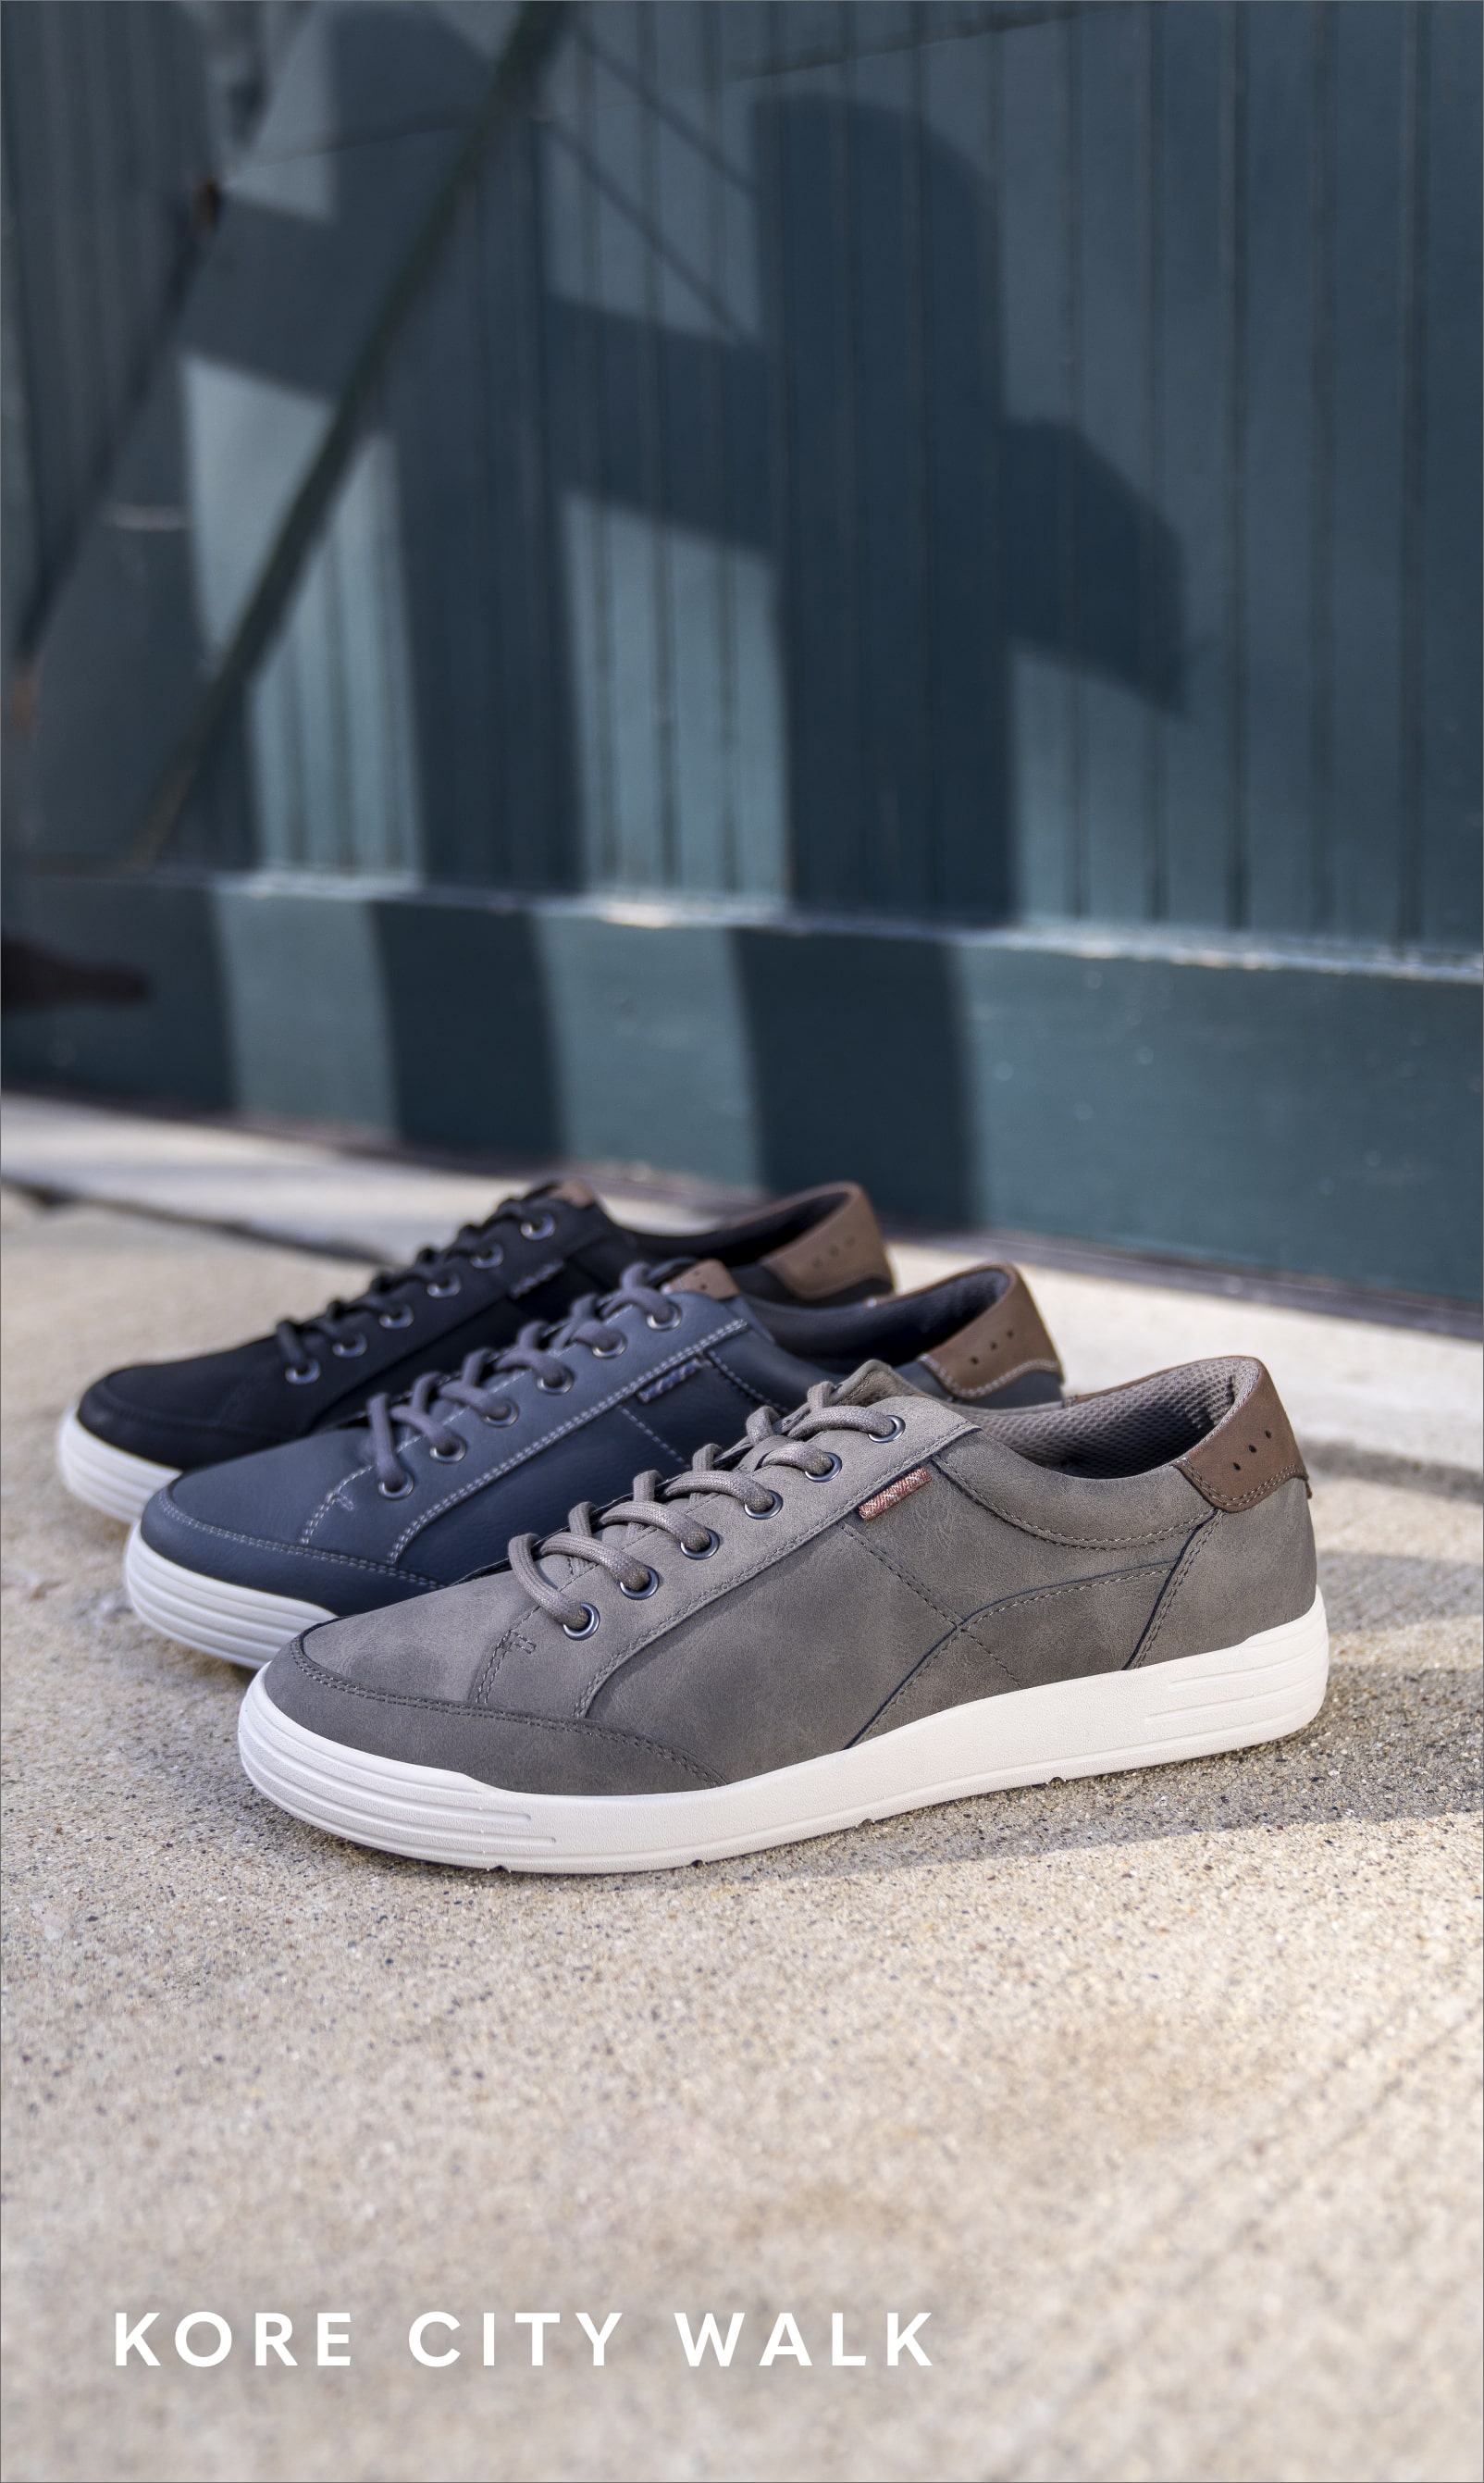 Men's Casual Shoes category. Image features the Kore City Walk in three colors